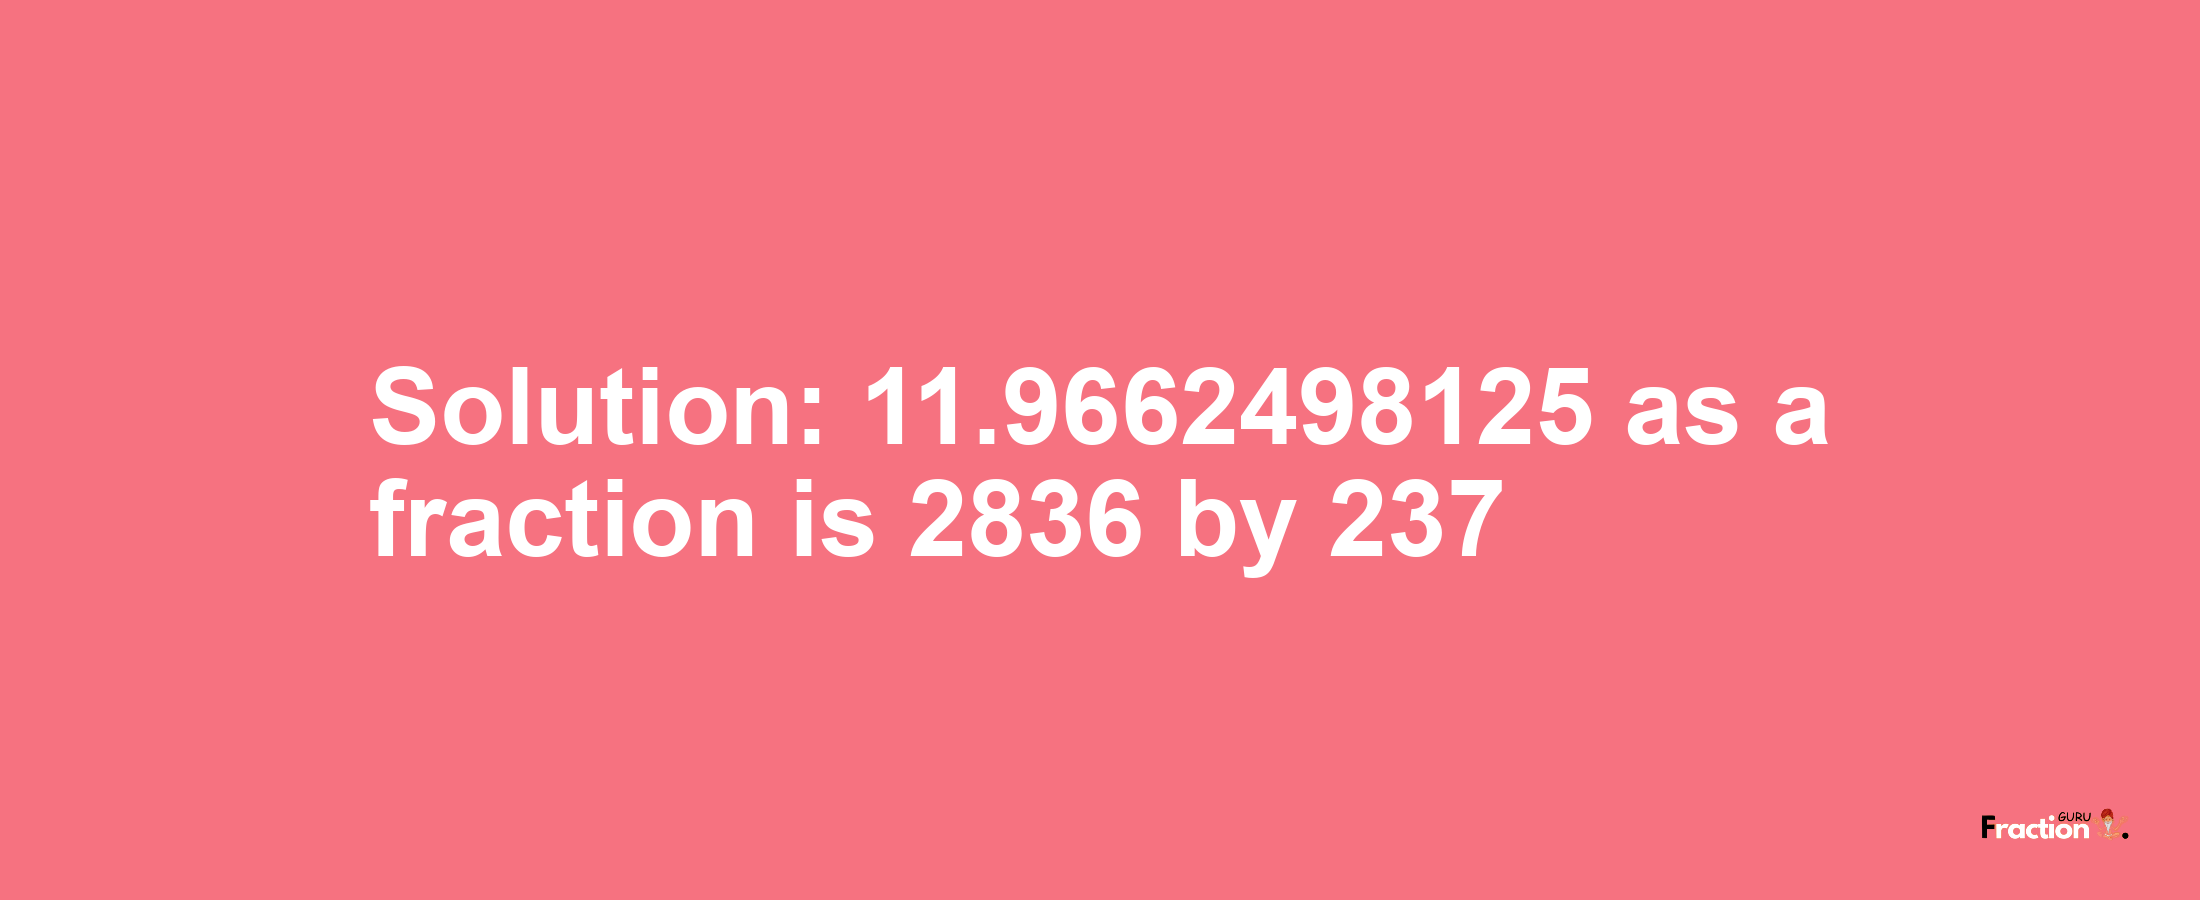 Solution:11.9662498125 as a fraction is 2836/237